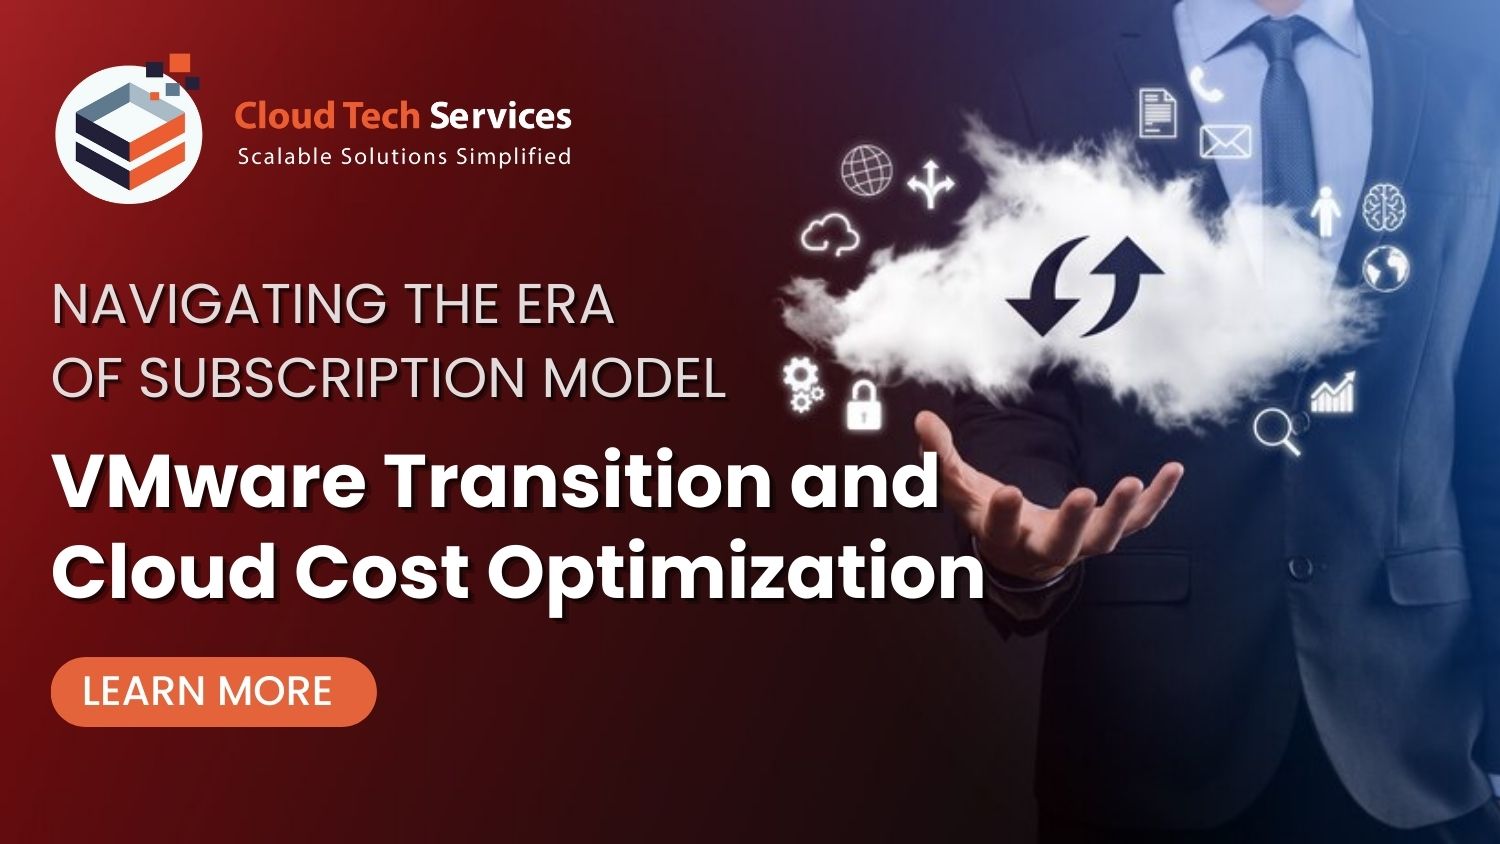 VMware Transition and Cloud Cost Optimization-Navigating The Era of Subscription Model